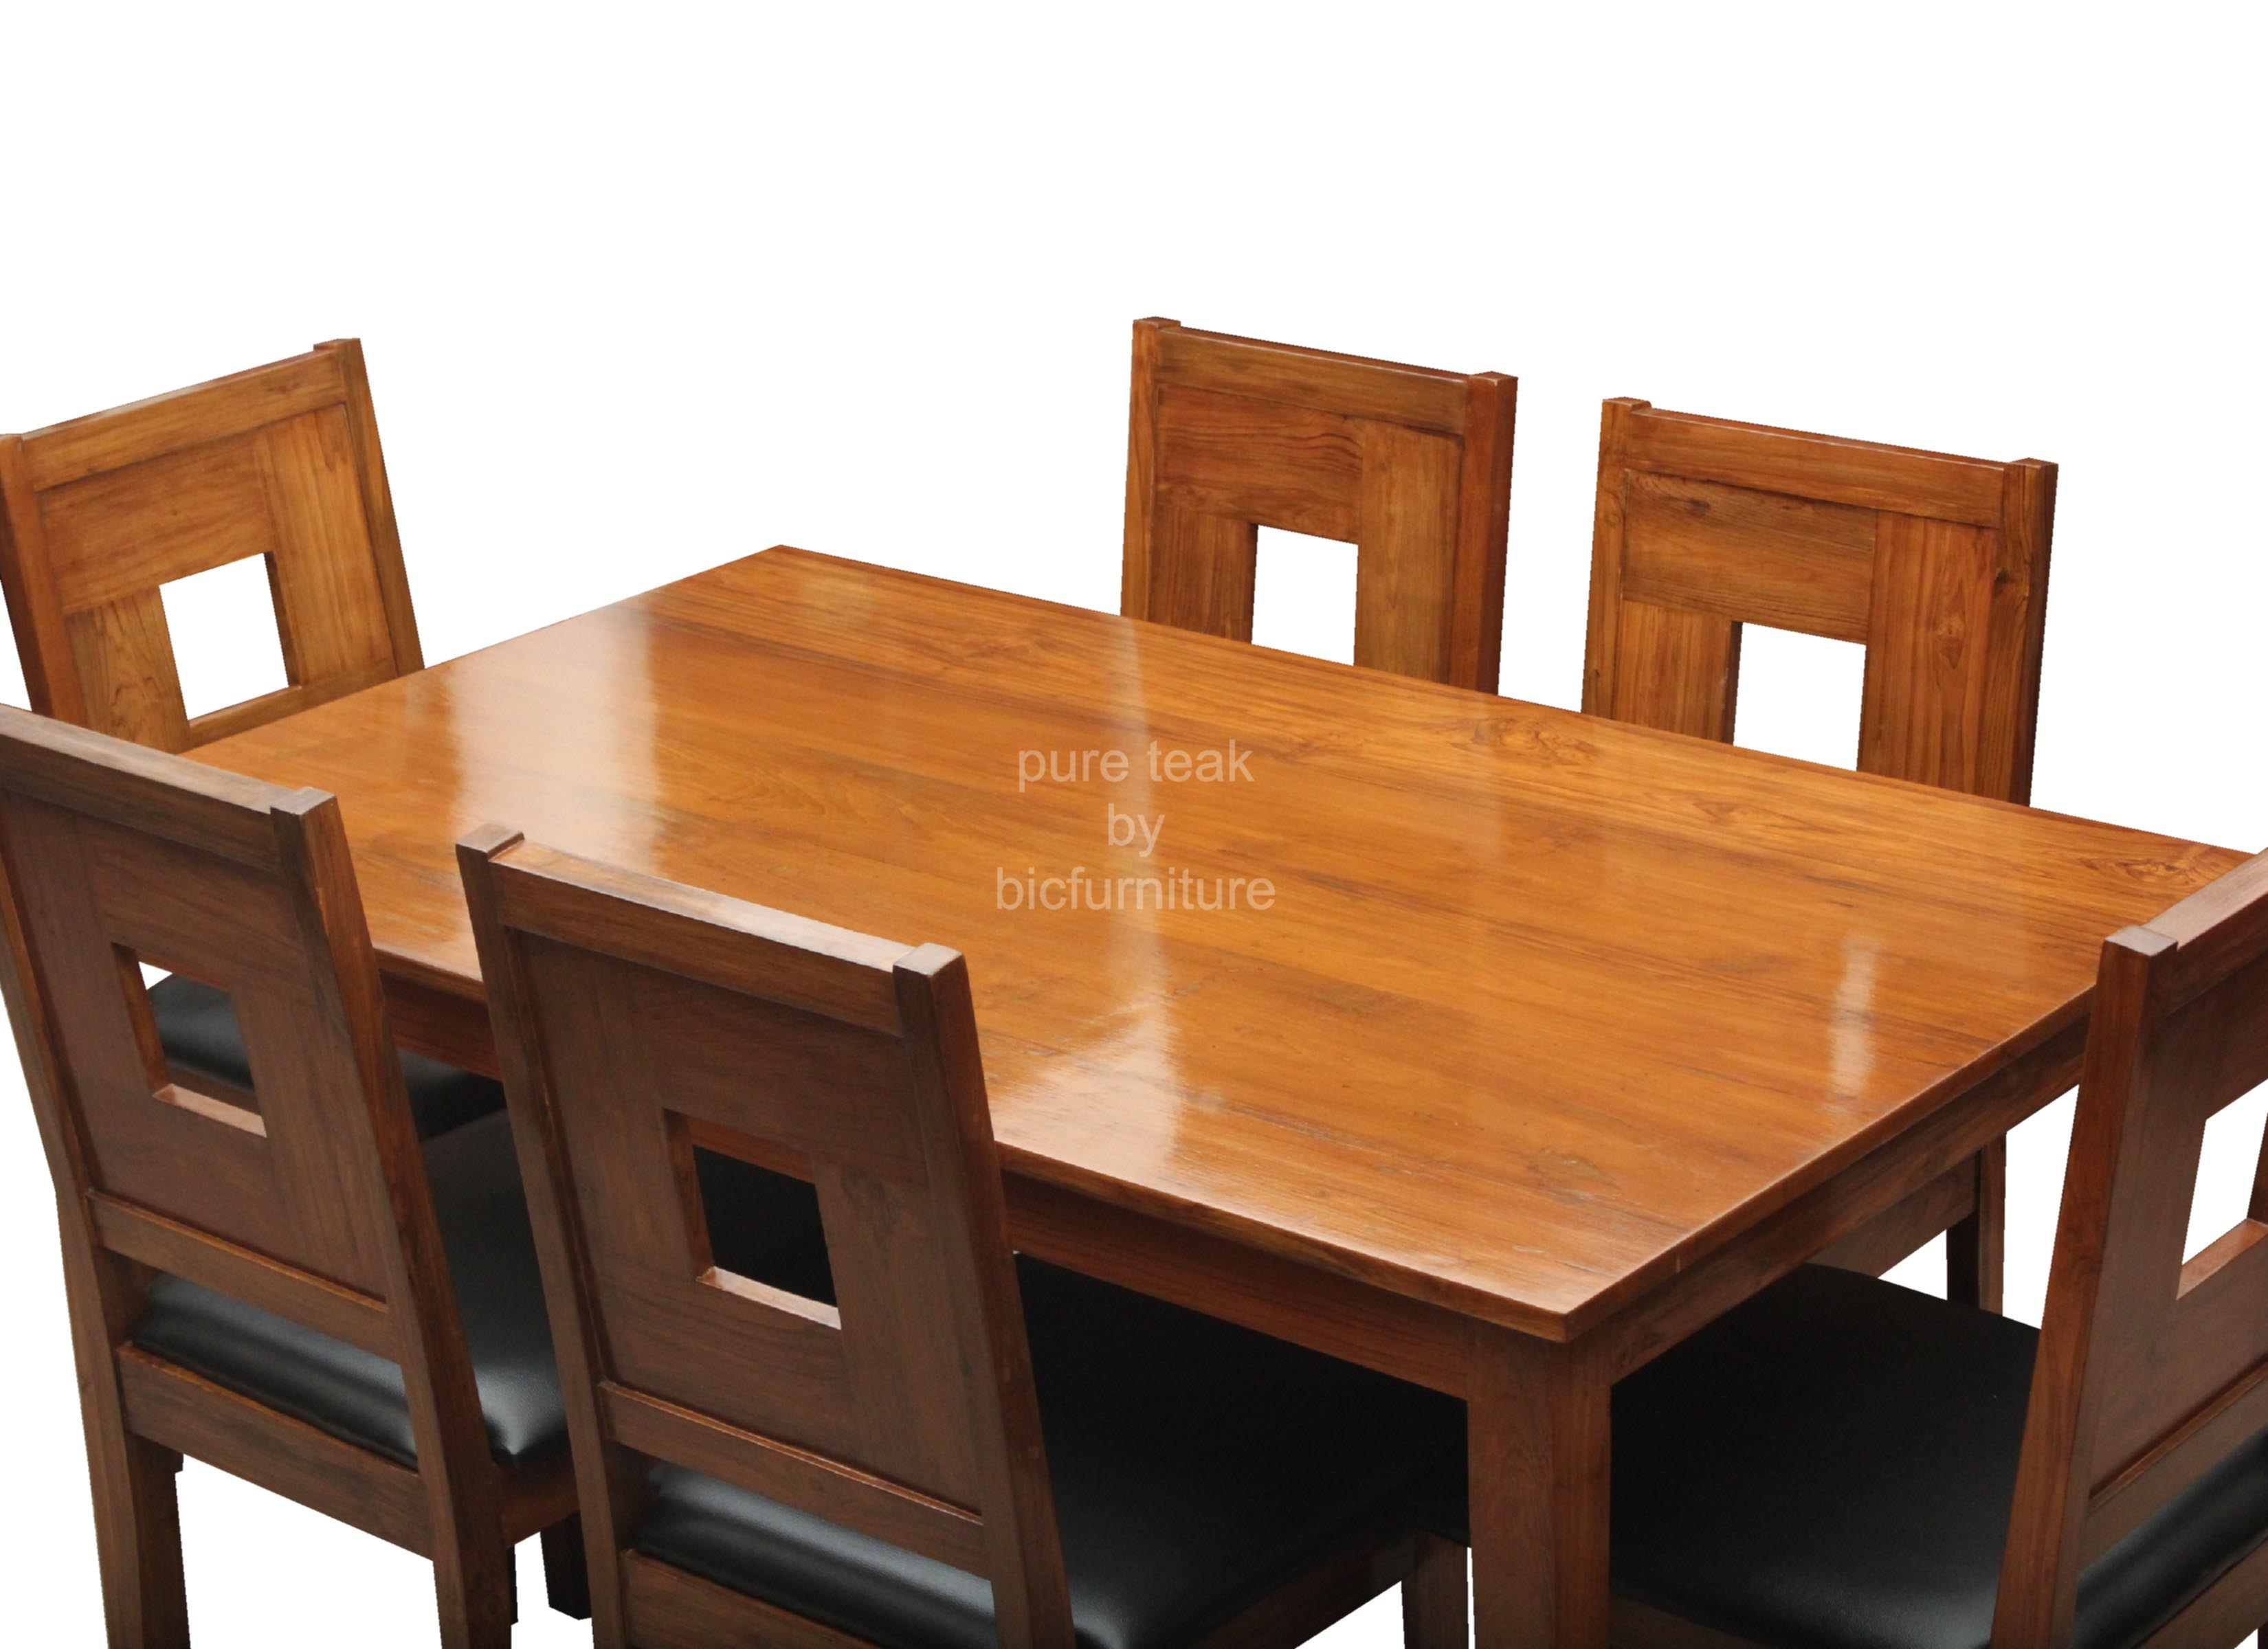 Stylish Teak Dining With Art Leather Chairs In 6 Seater Set